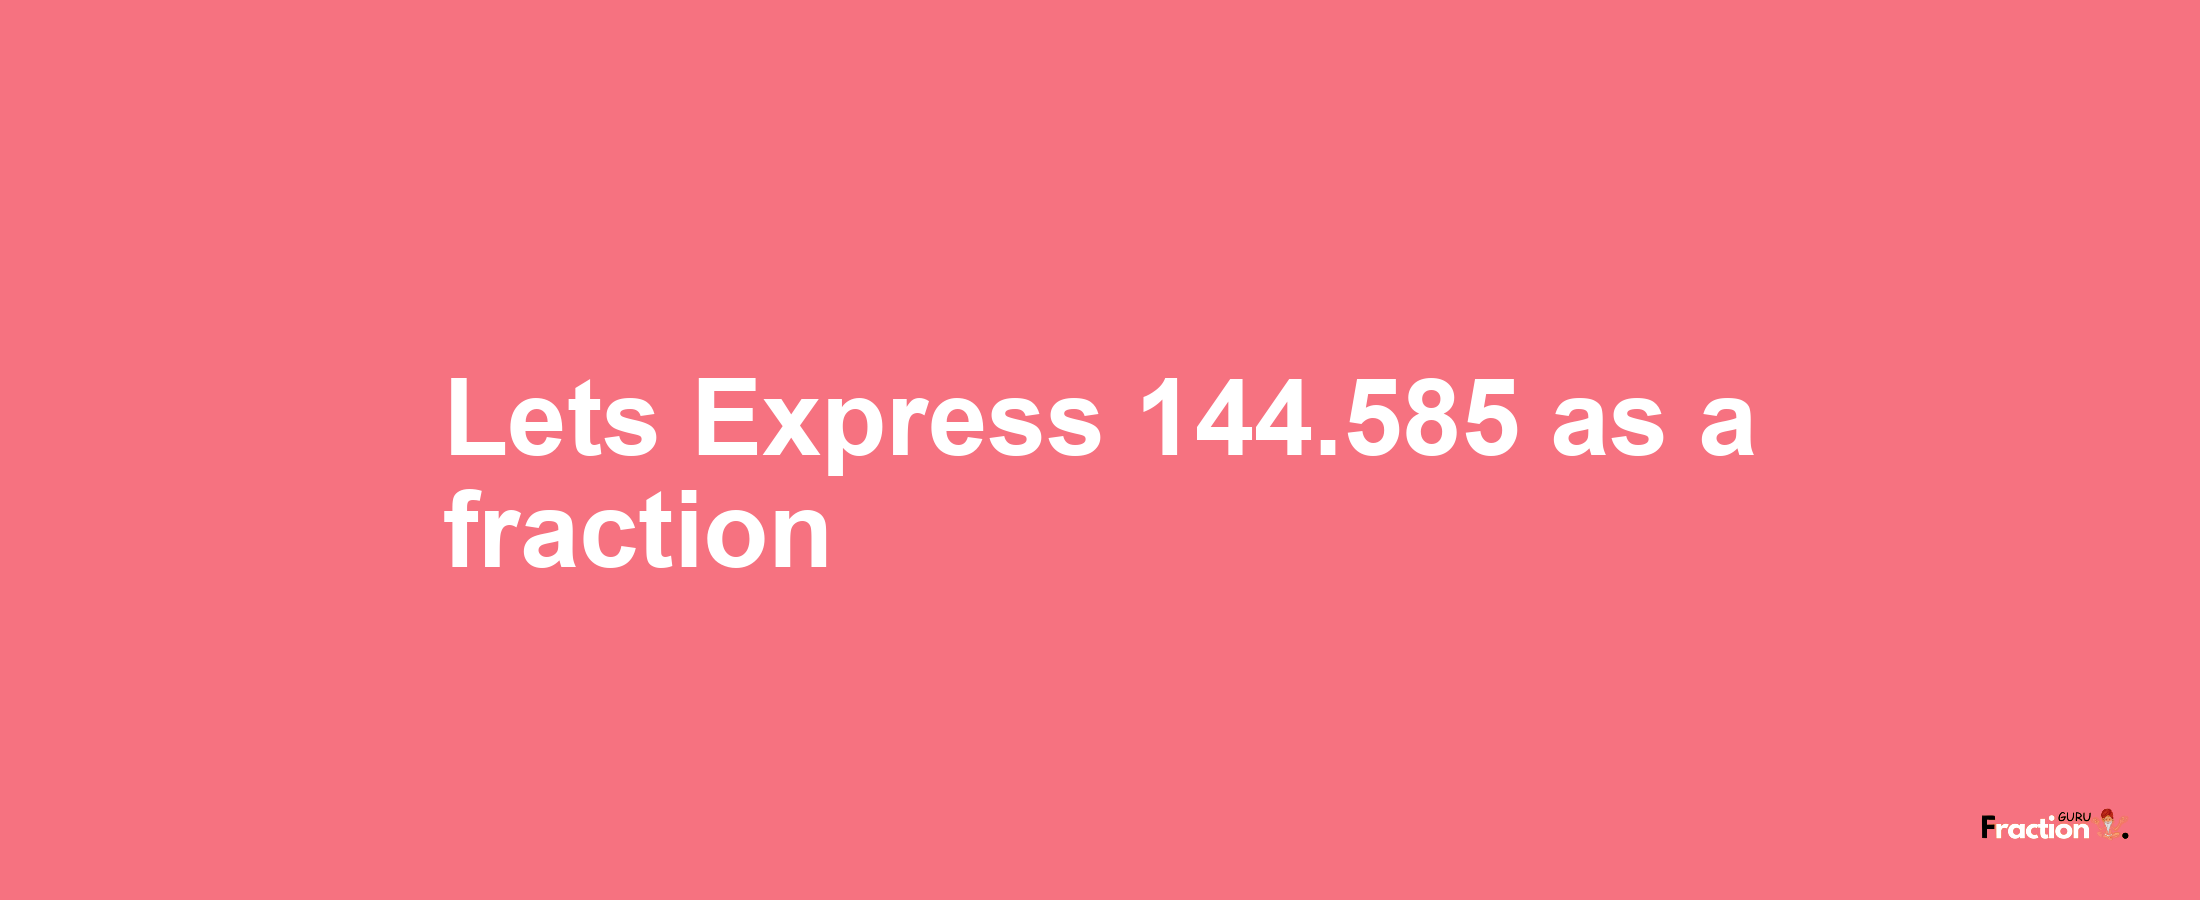 Lets Express 144.585 as afraction